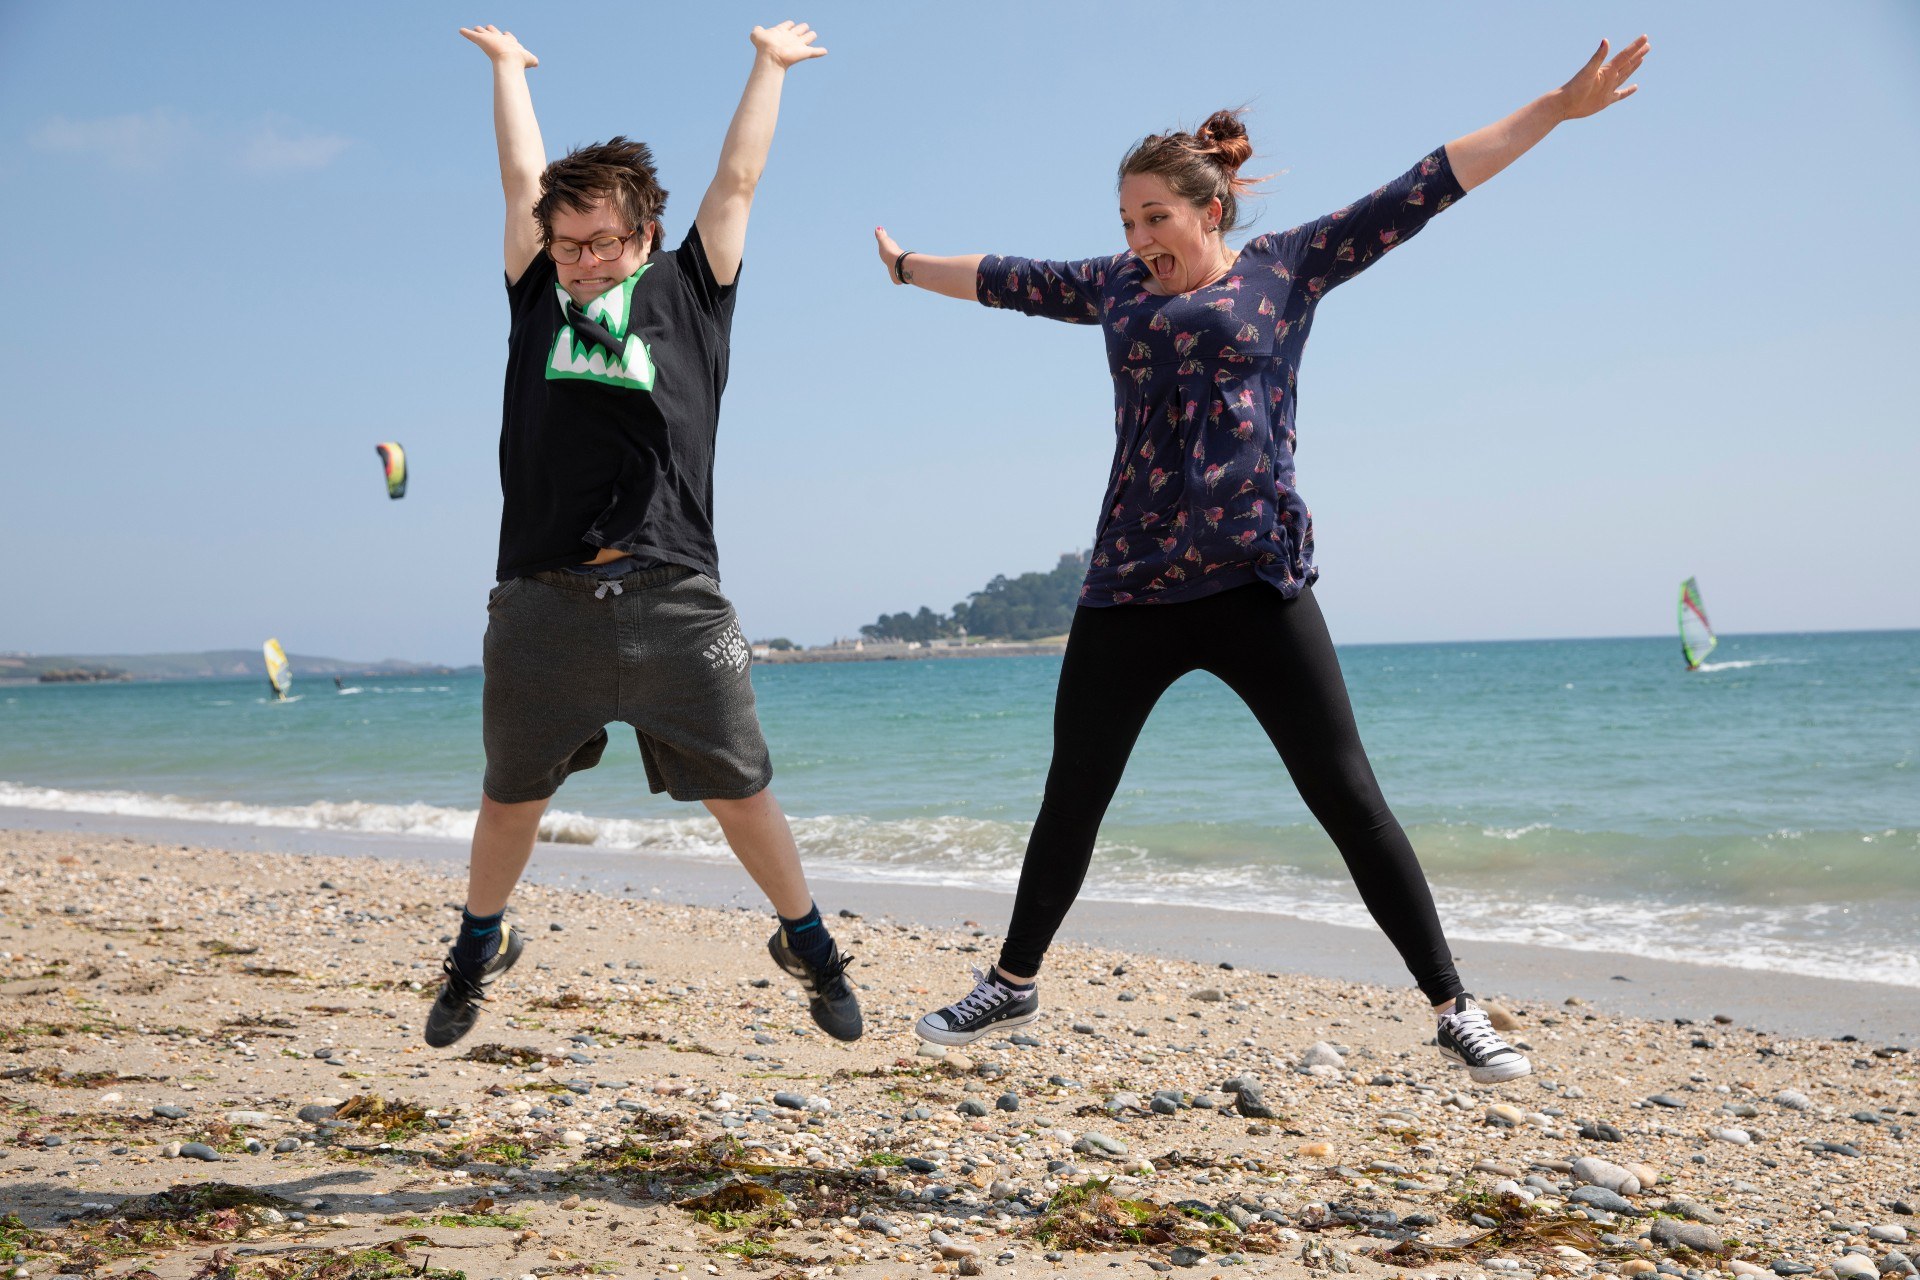 Mencap participant and support worker jumping in the air on a beach